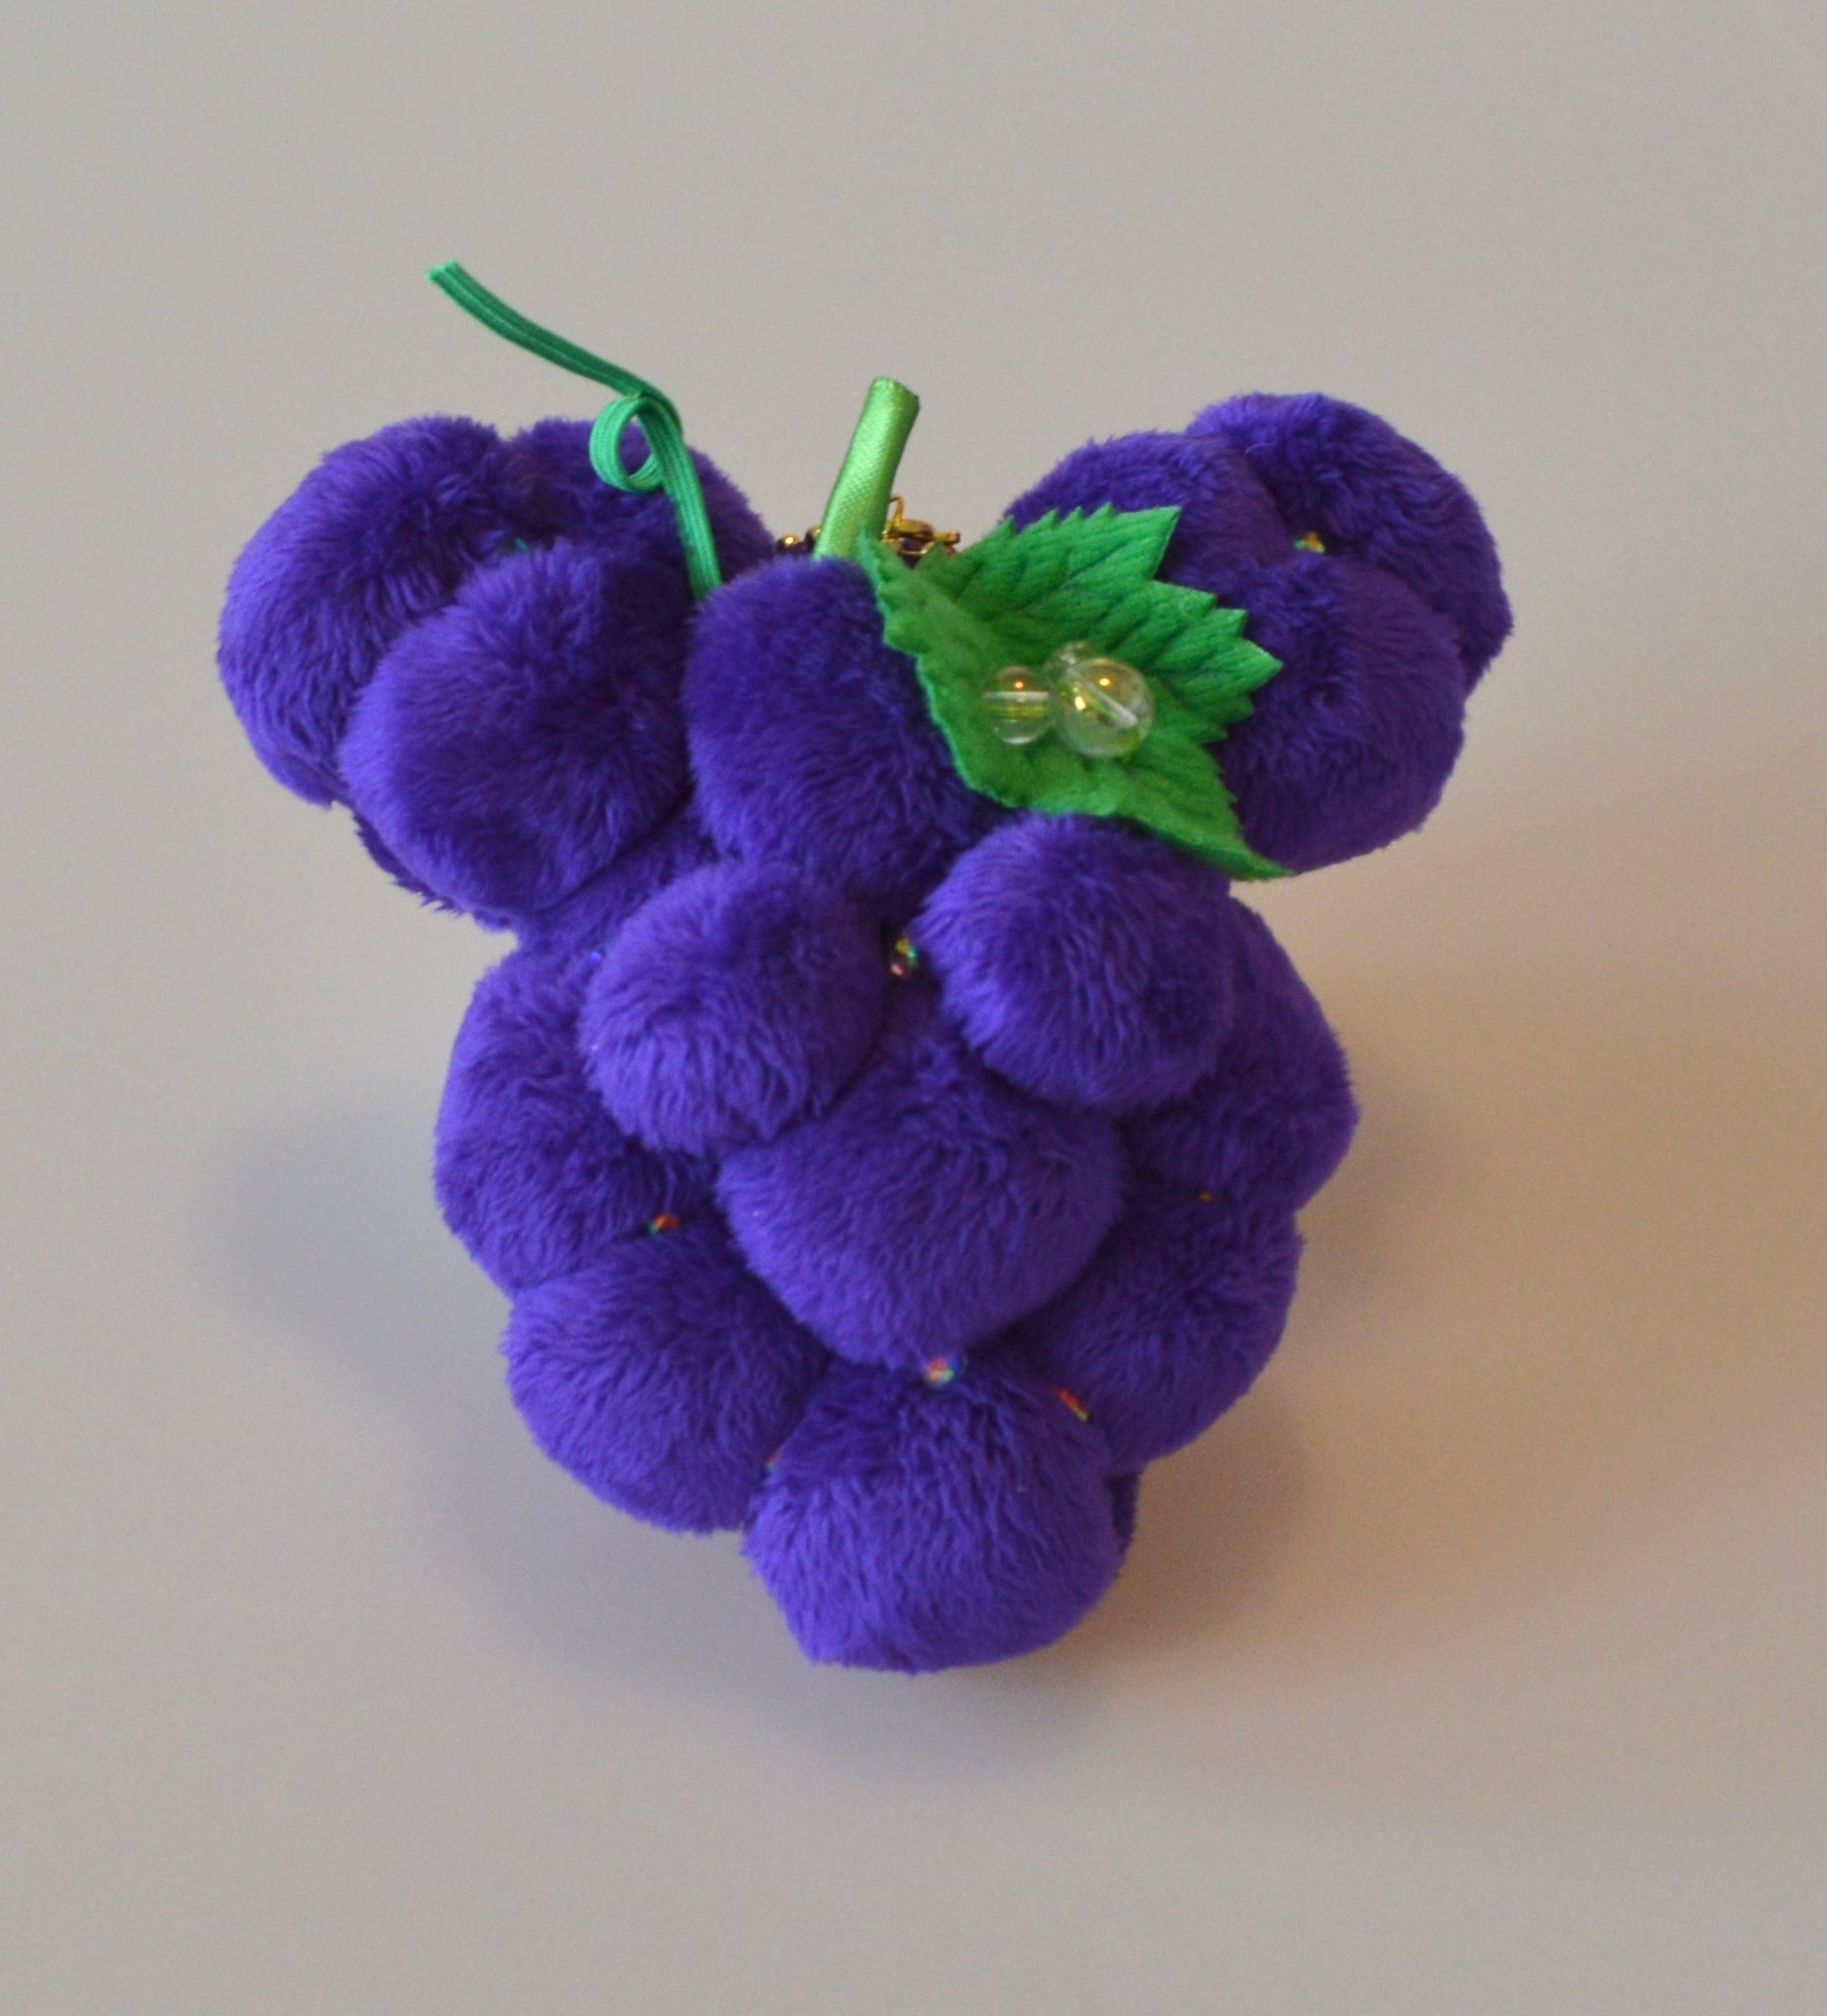 Coming soon, May 12th at 6pm PST/ Pre-order (ship in 2-4weeks) Purple Grape Plush accessory